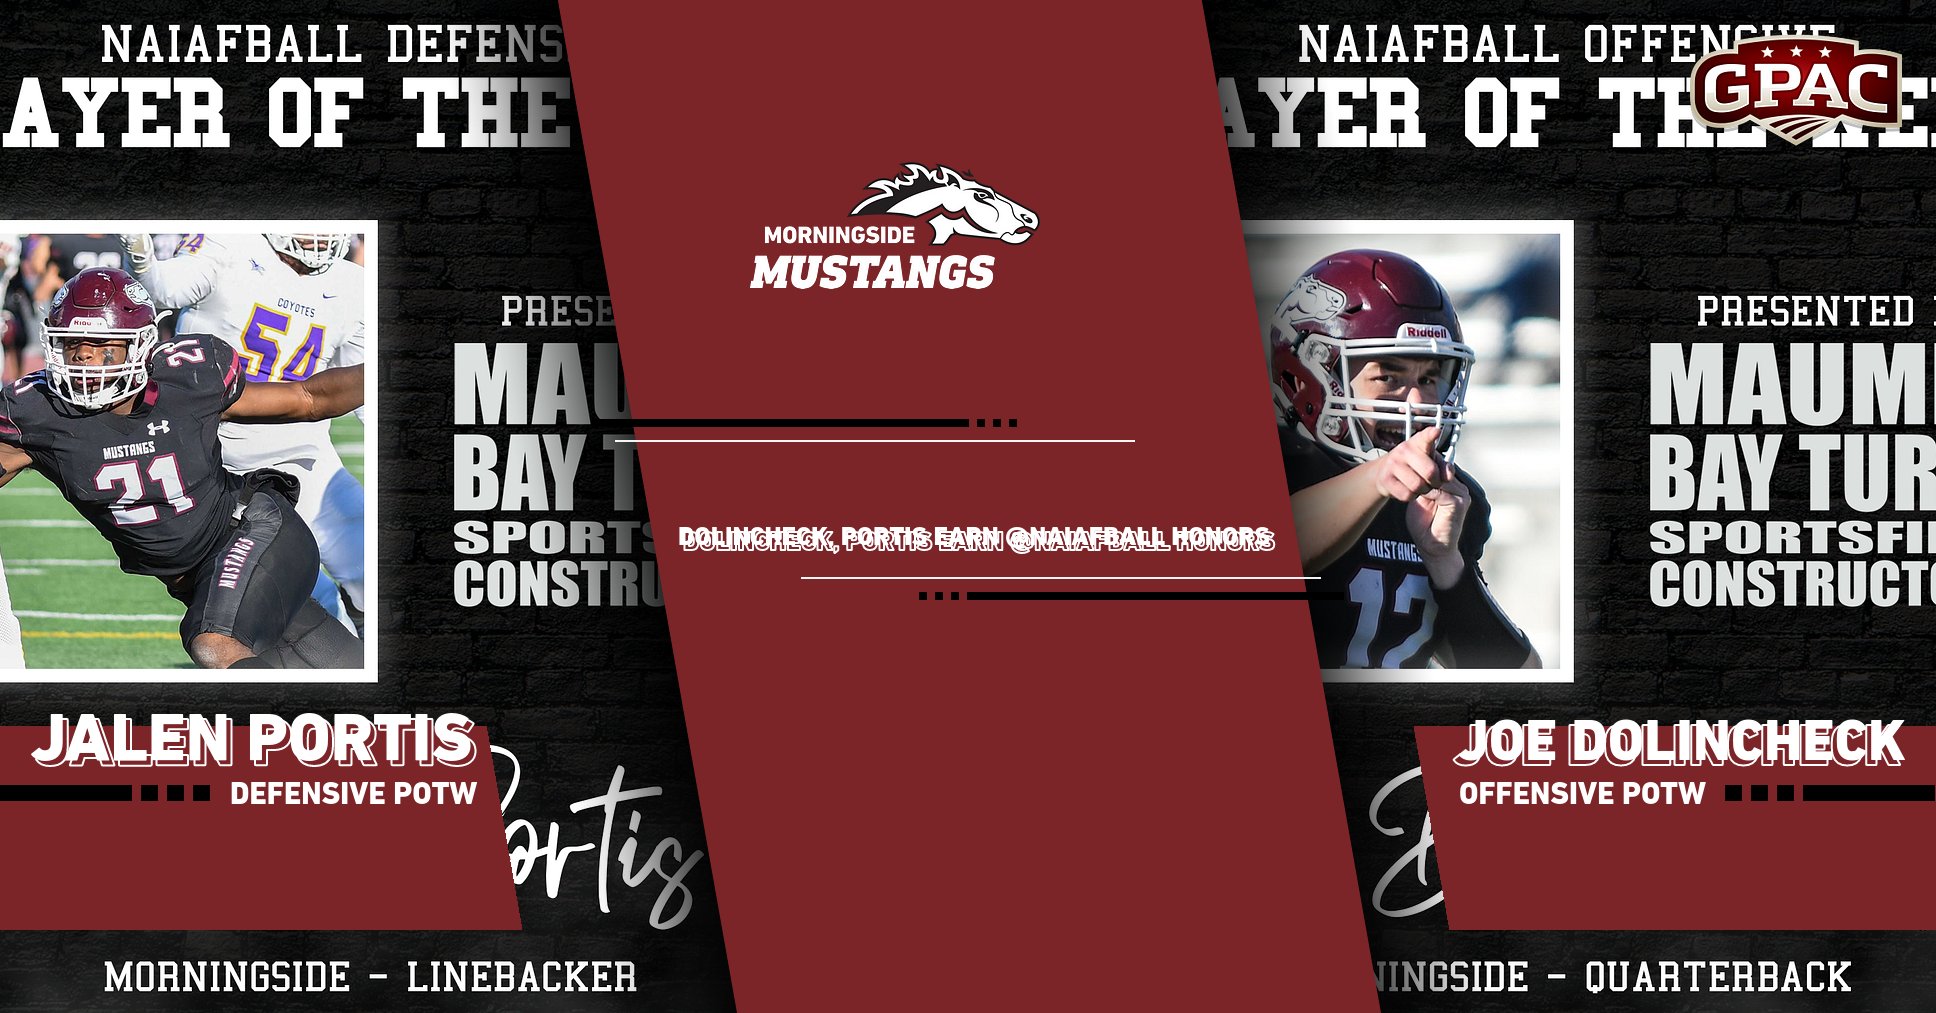 Dolincheck, Portis recognized by @NAIAFBALL